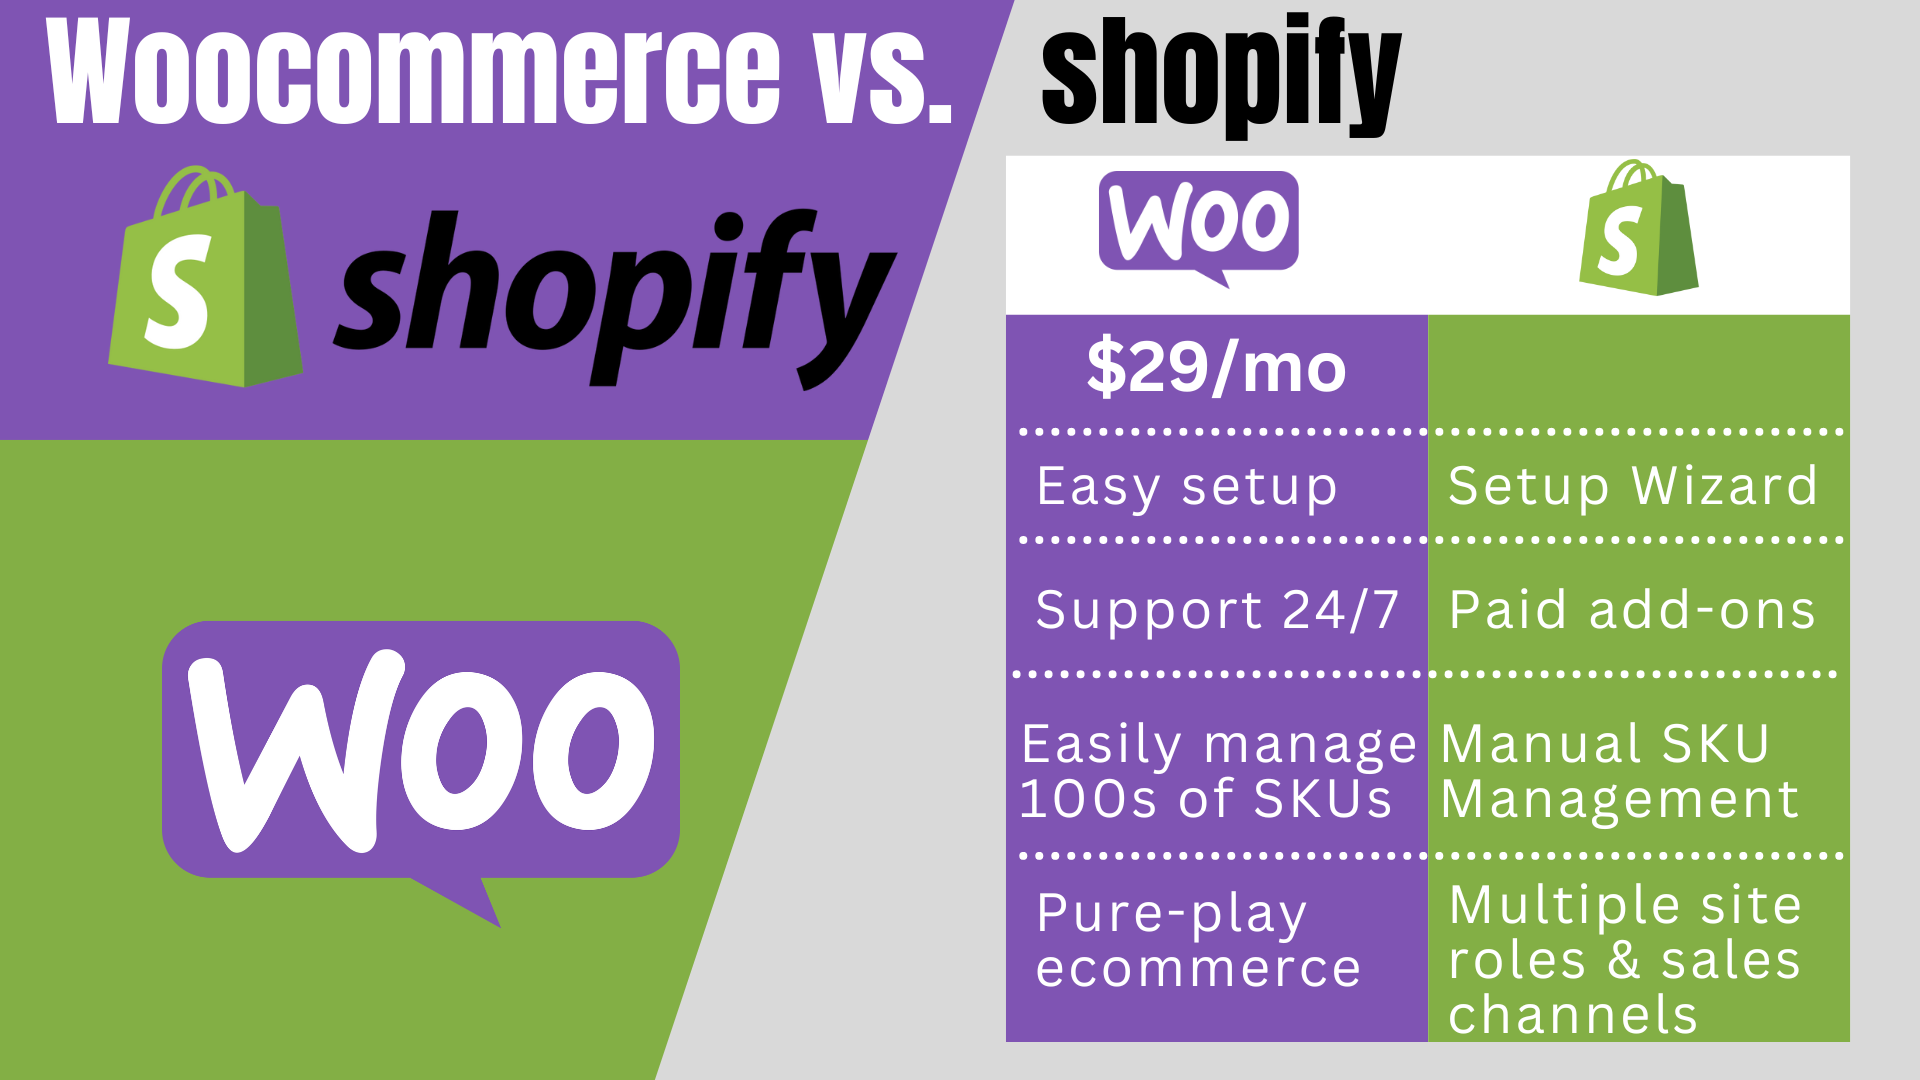 Woocommerce Vs Shopify Differences